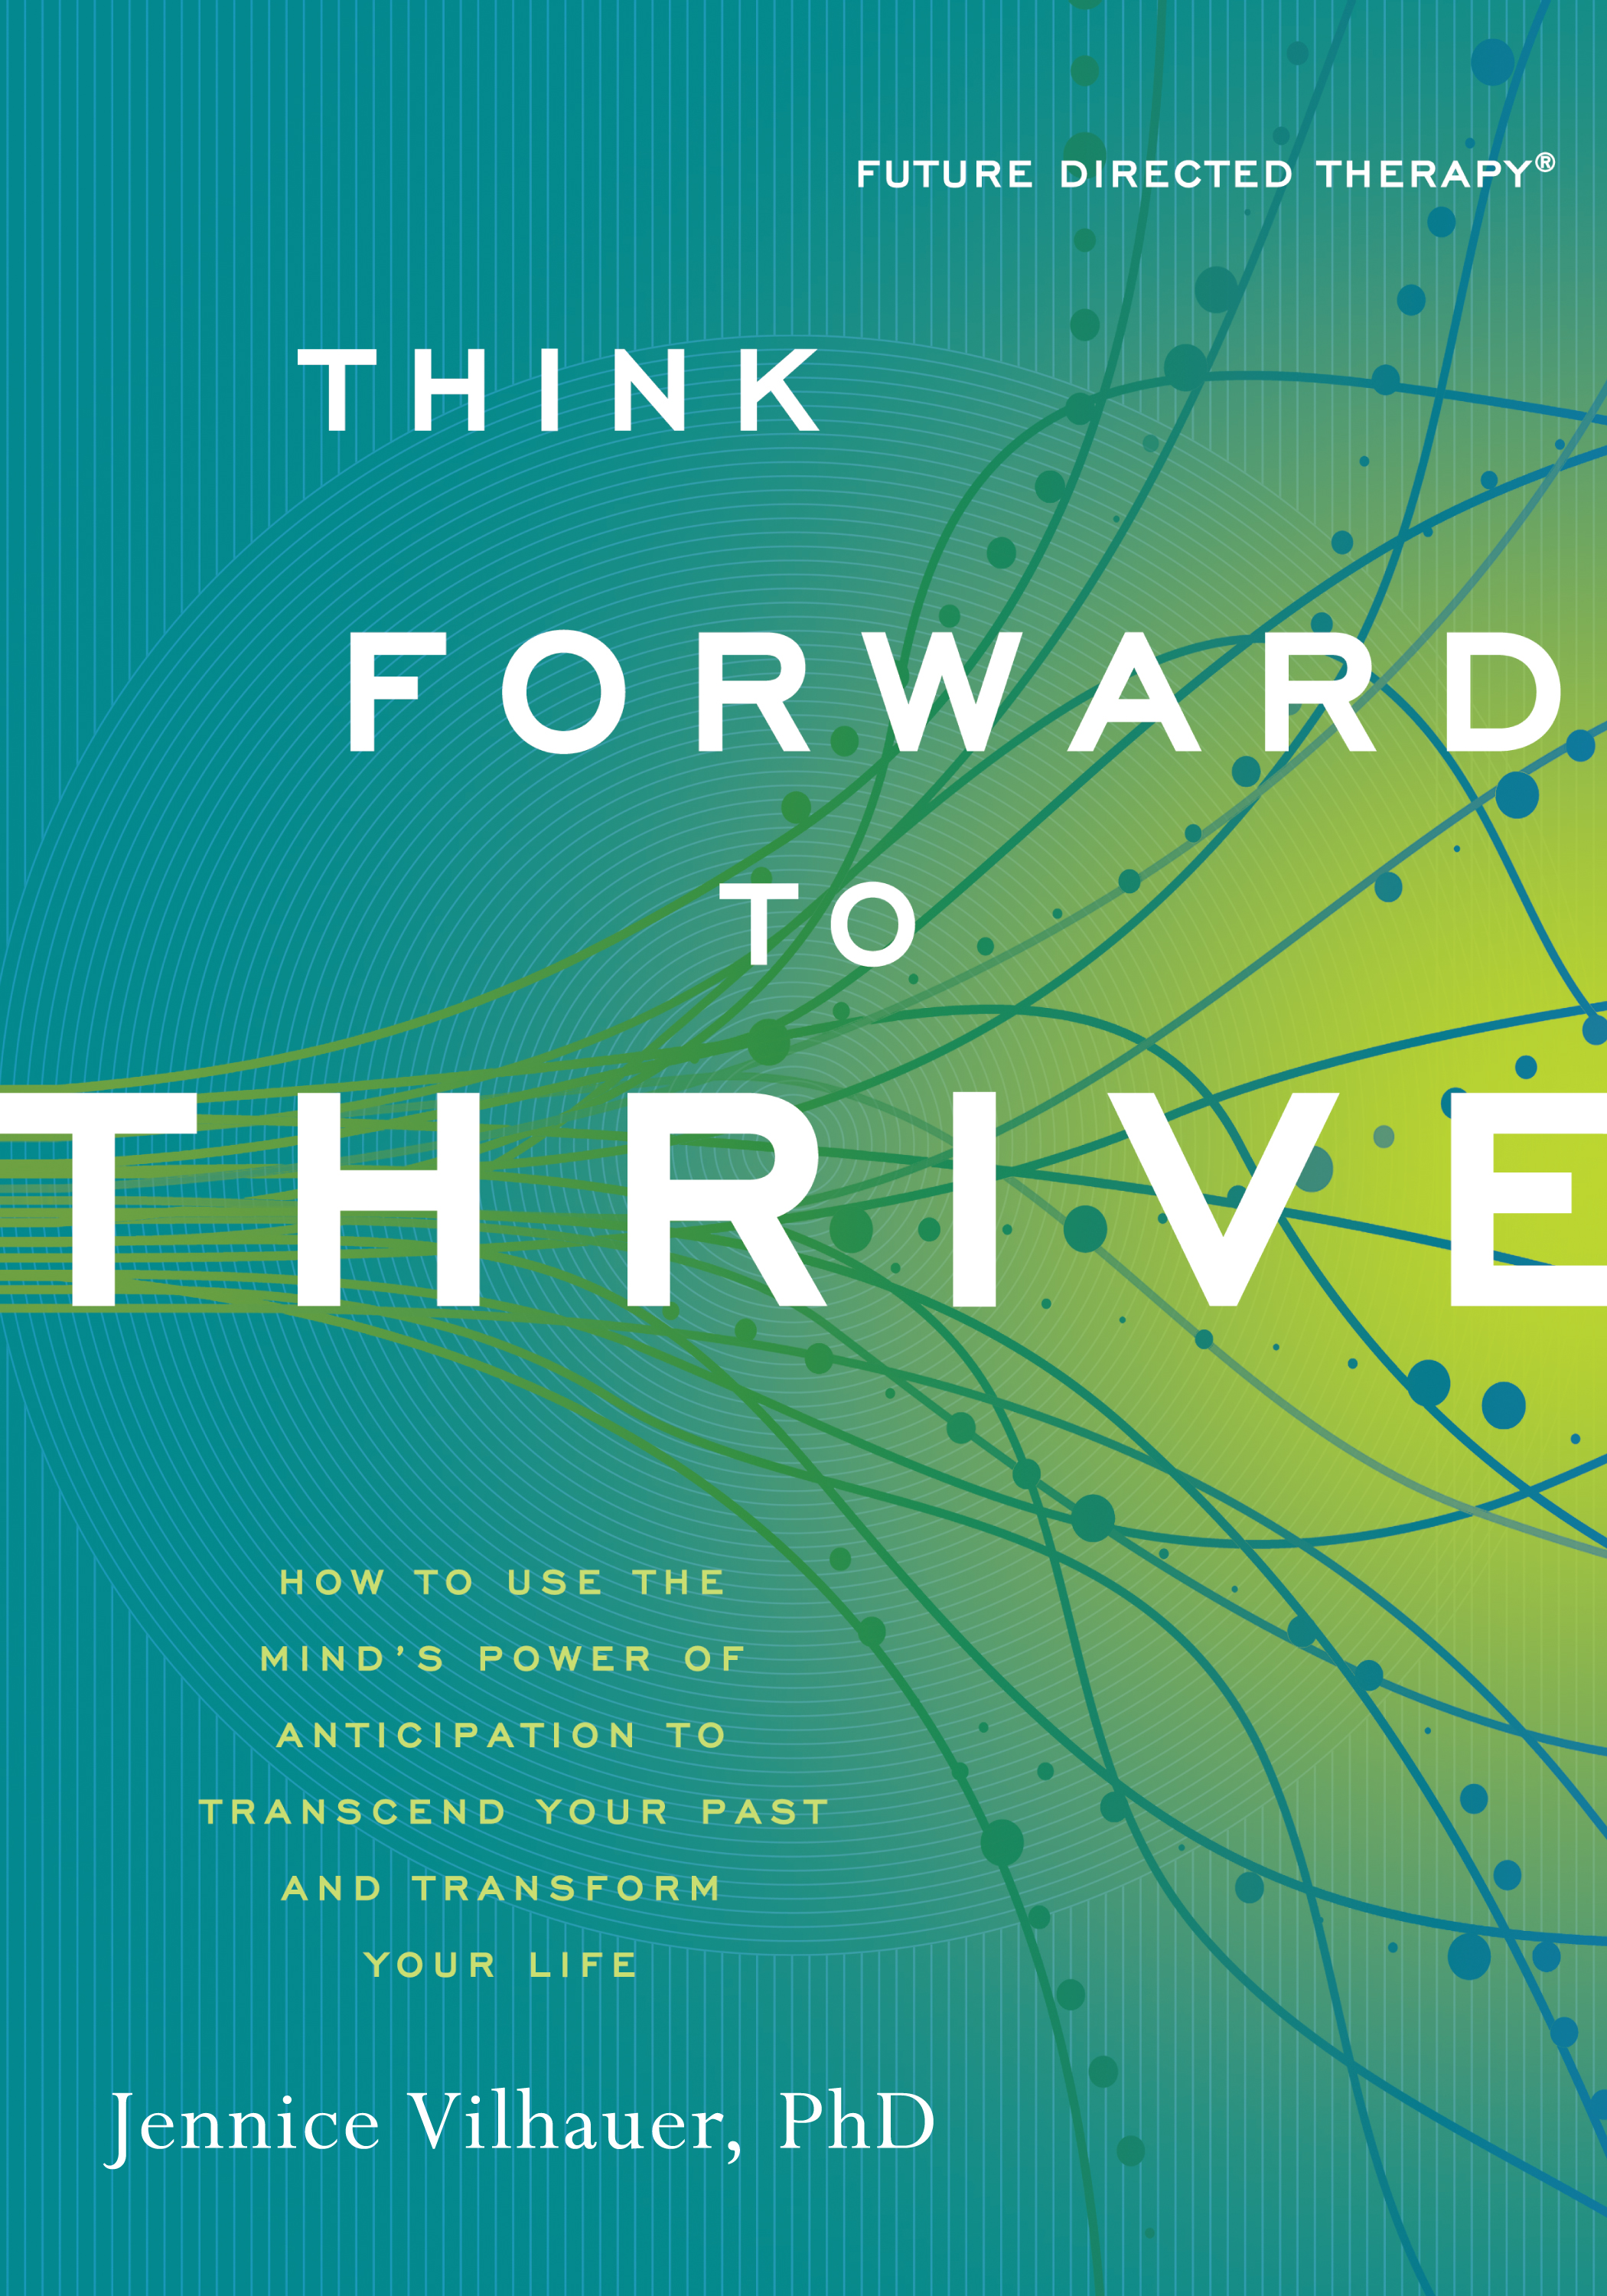 Think Forward to Thrive